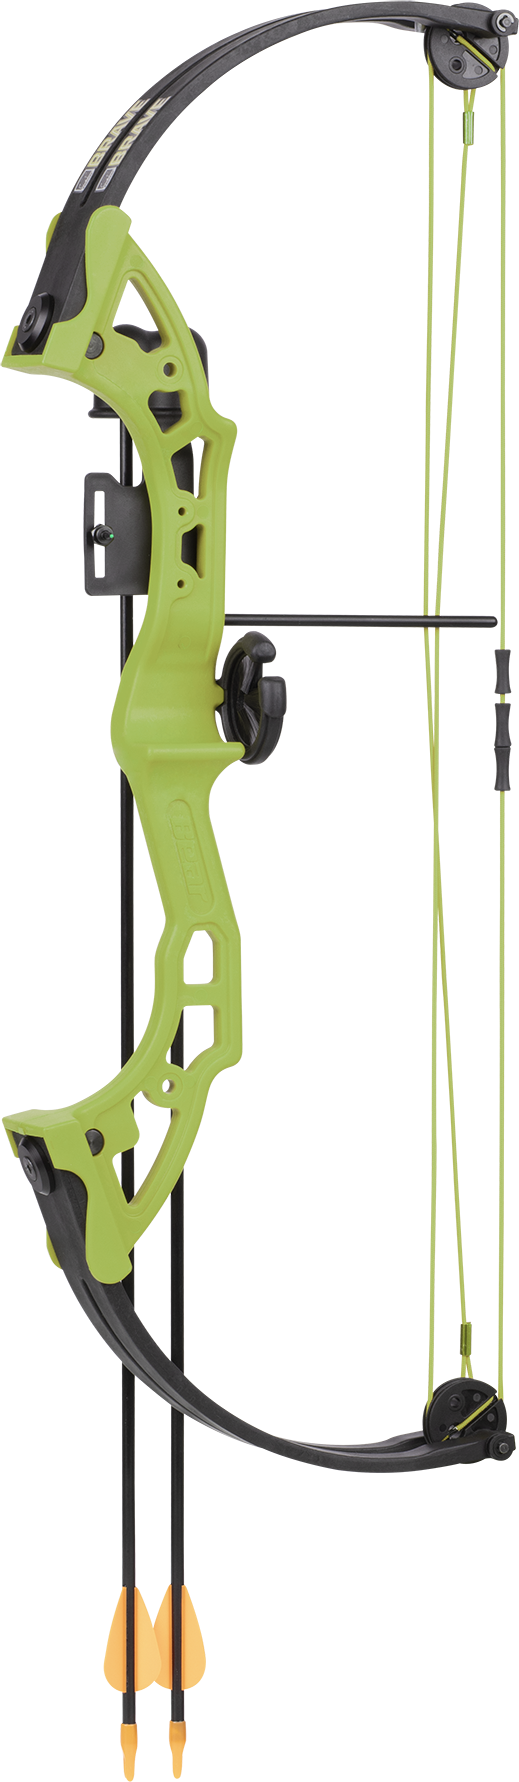 Bear Brave with Biscuit - Green Compound Bow - Youth_1